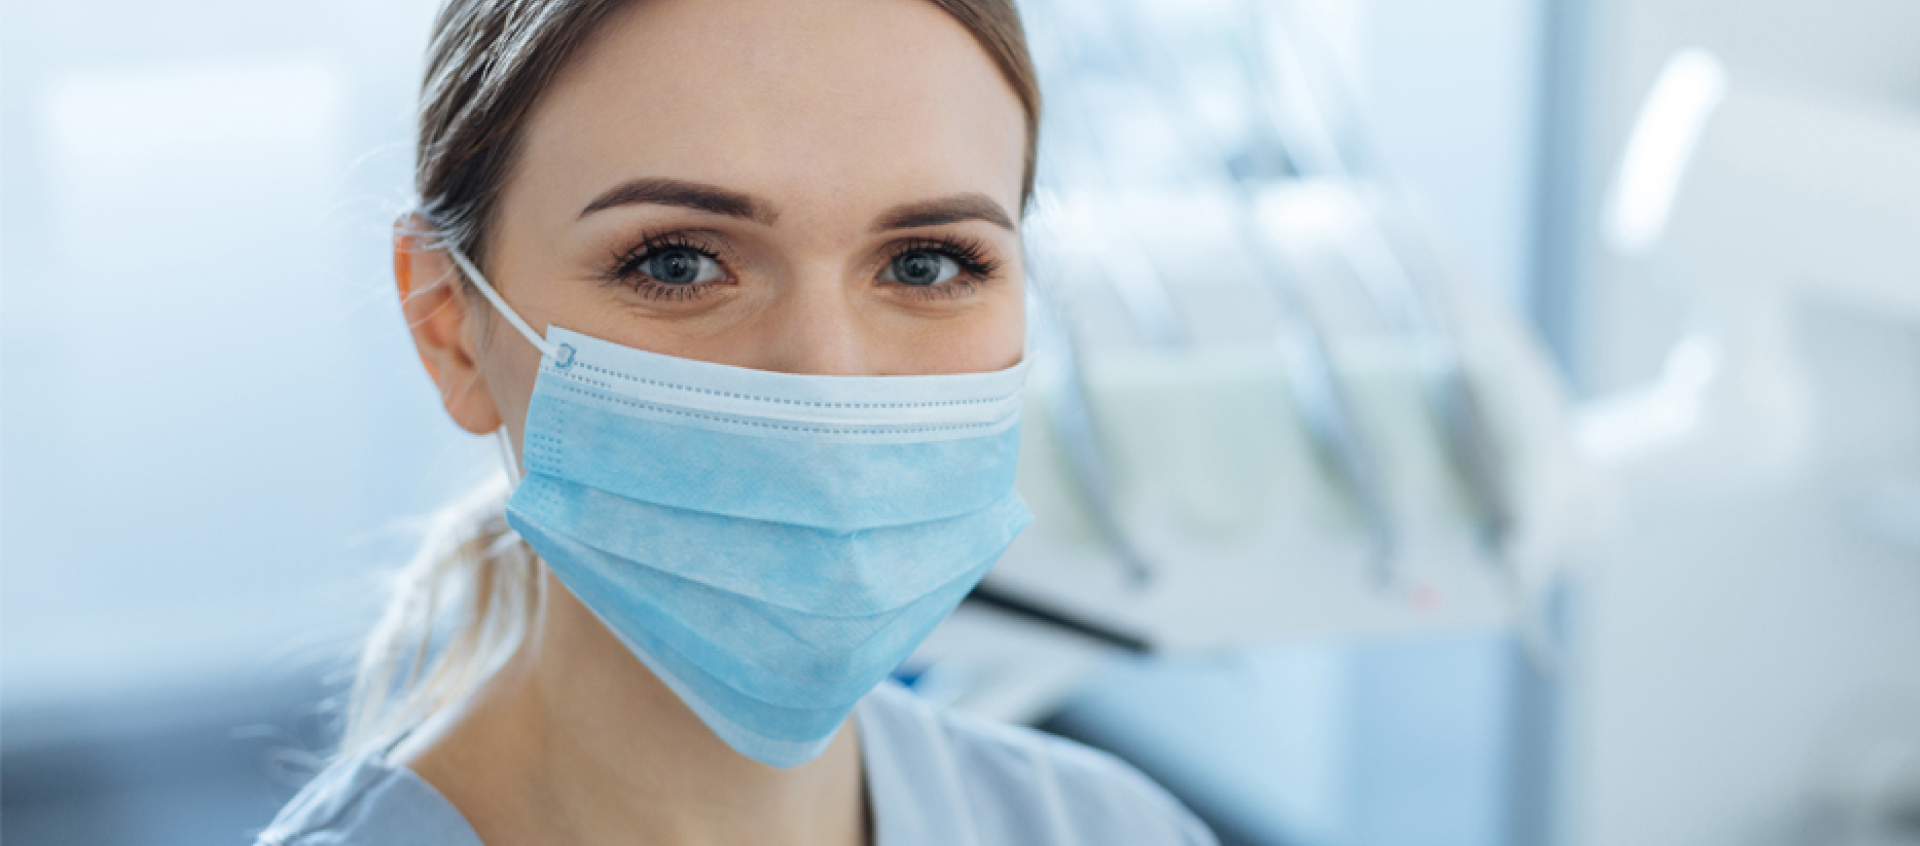 A close up of a woman wearing a surgical mask.